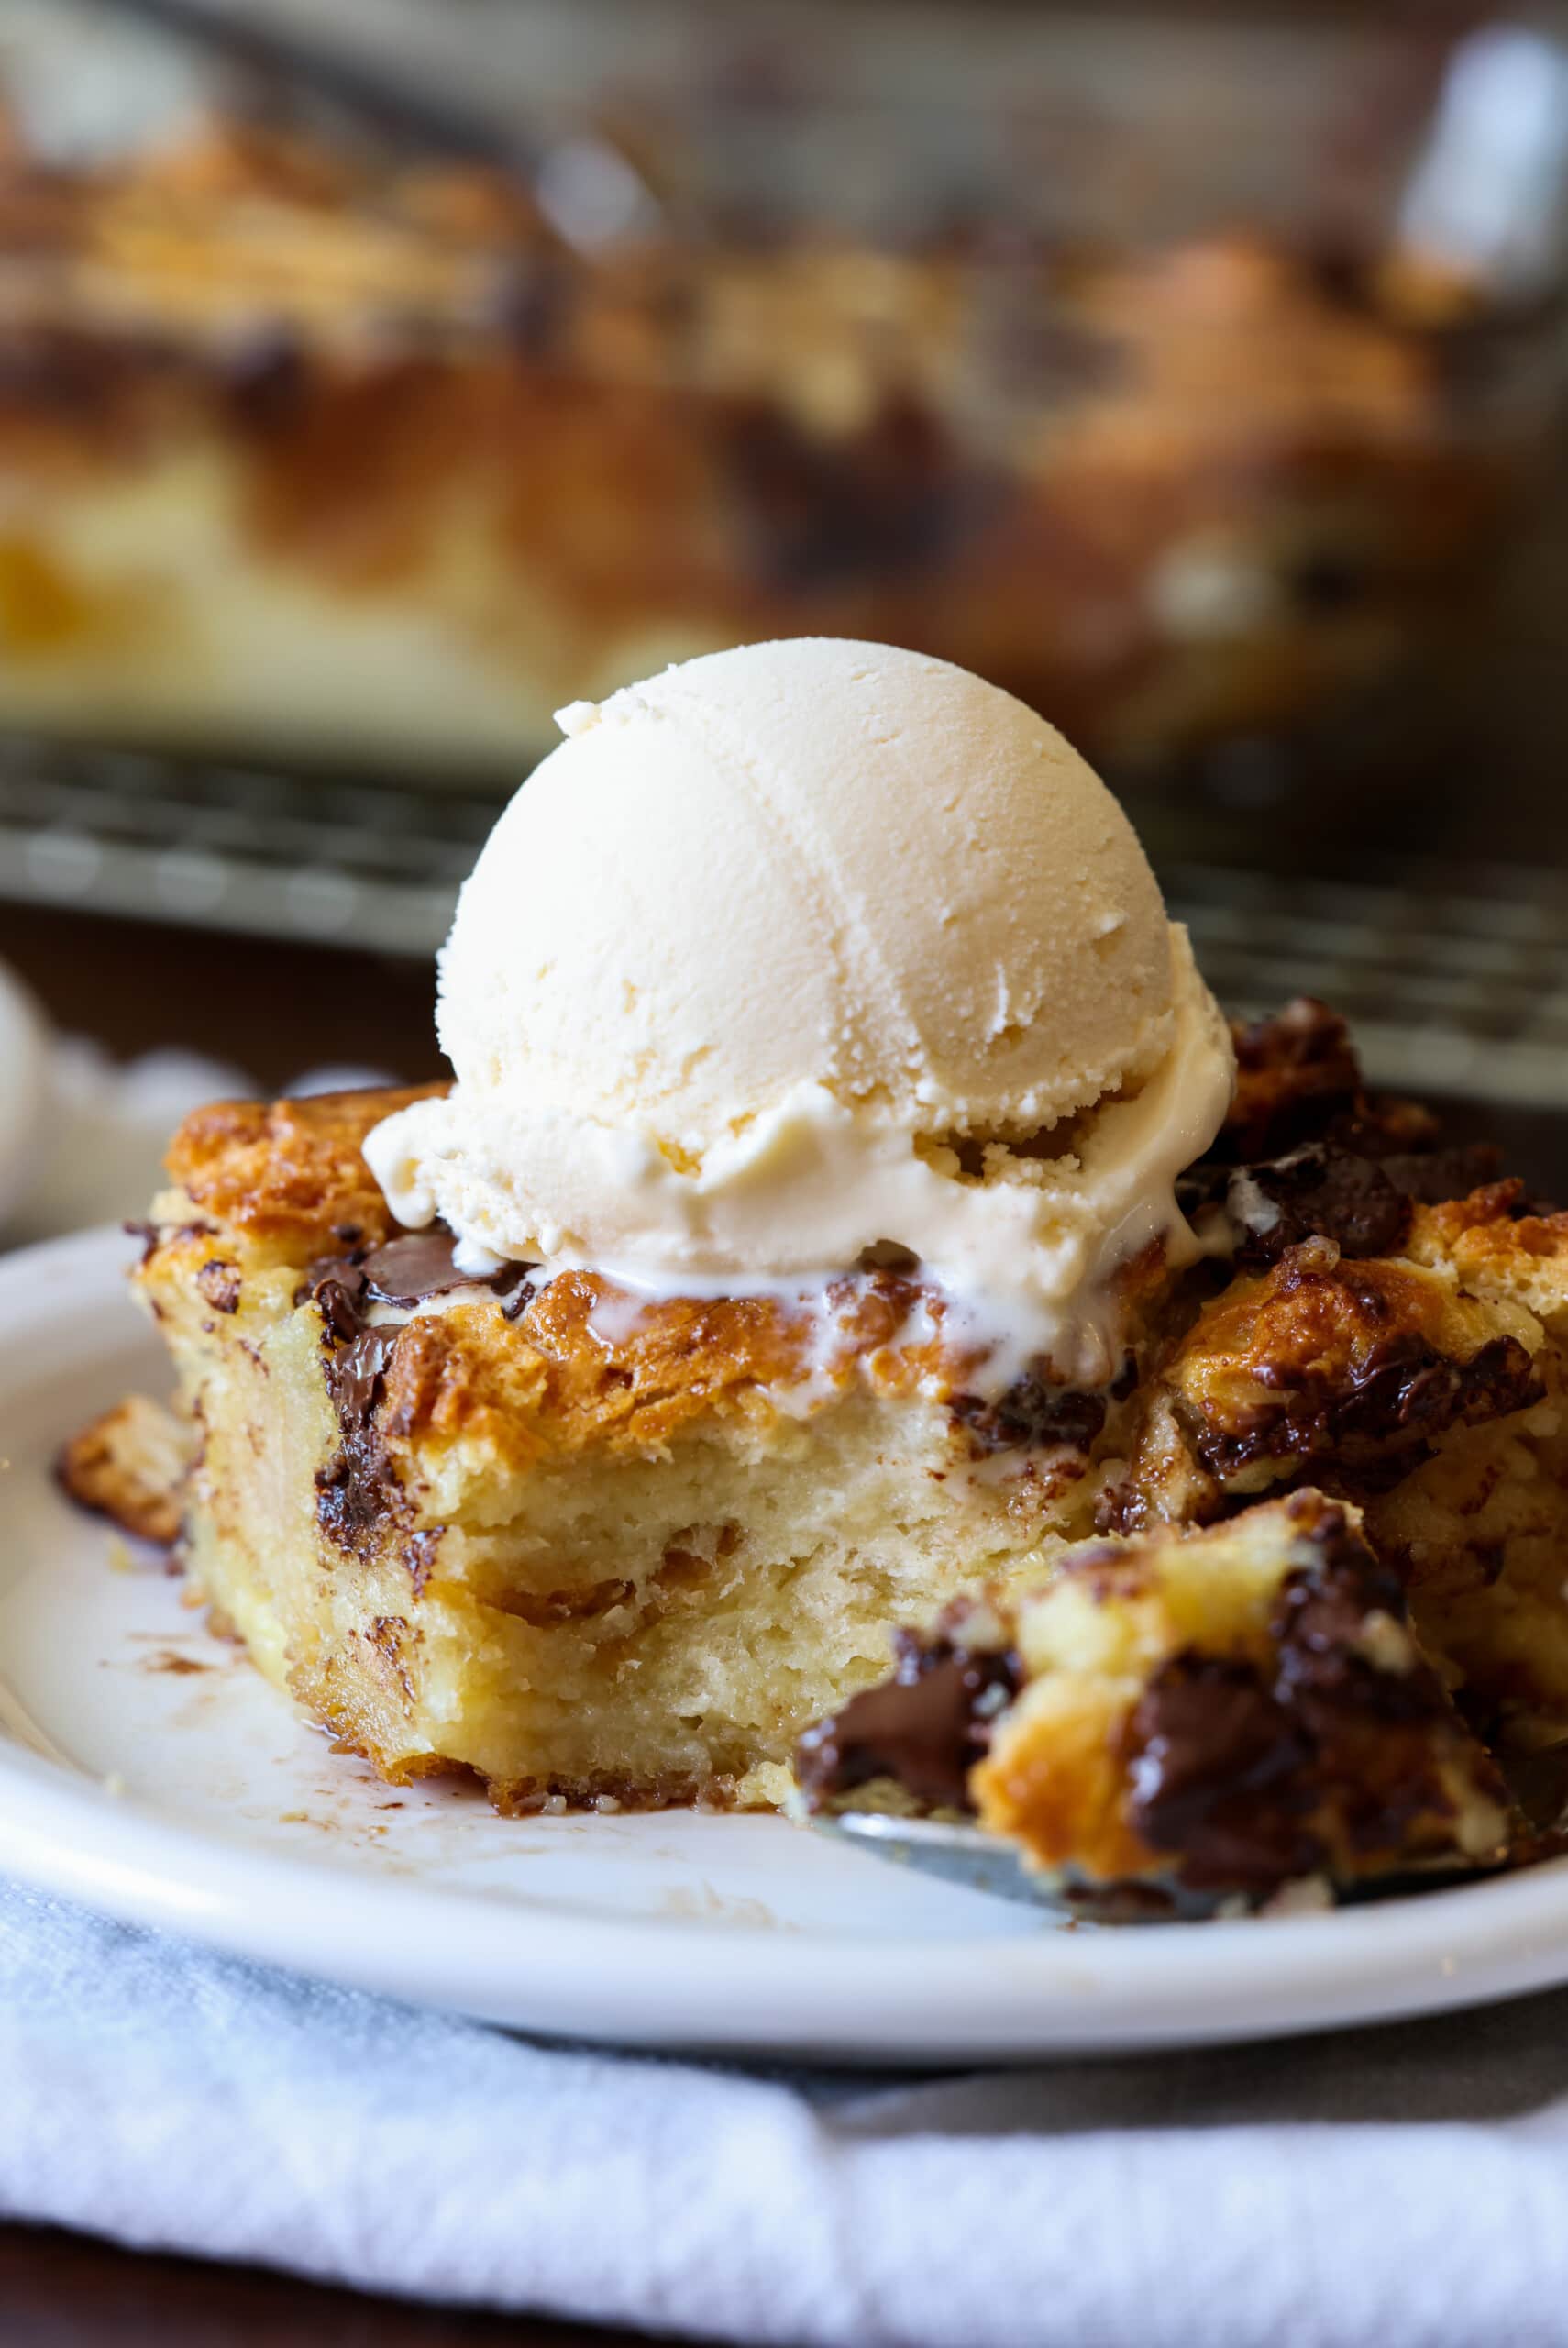 Bread pudding made from biscuits on a plate with a scoop of ice cream